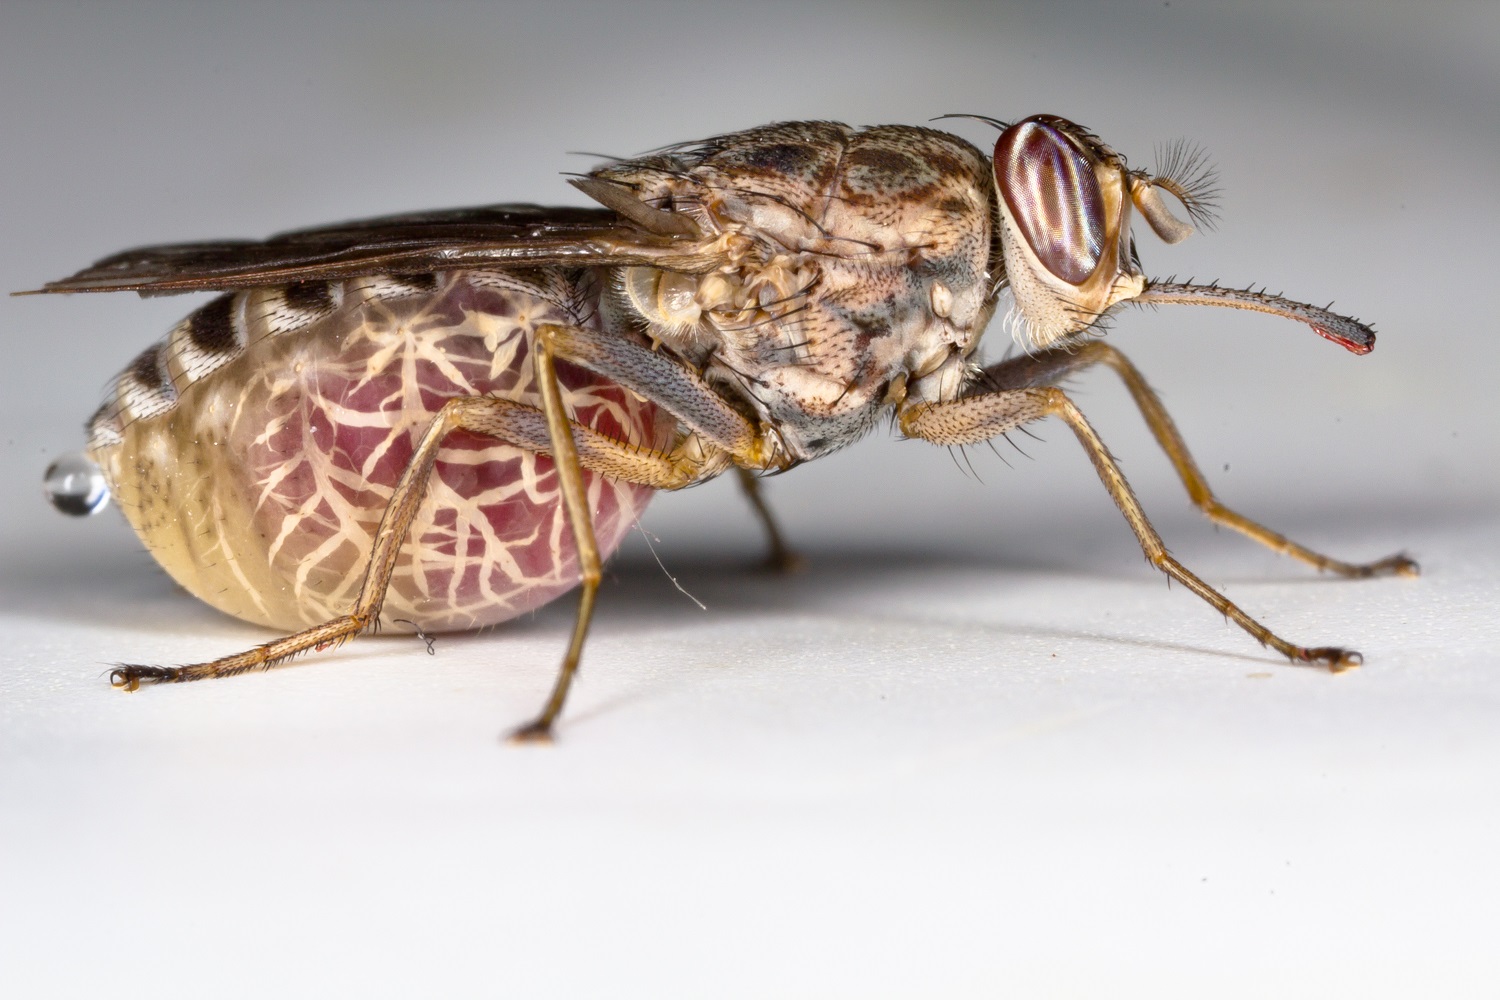 A tsetse fly with its abdomen swollen after a blood meal.  Image credit: Oregon State University [CC BY-SA 2.0 (http://creativecommons.org/licenses/by-sa/2.0)], via Flickr.